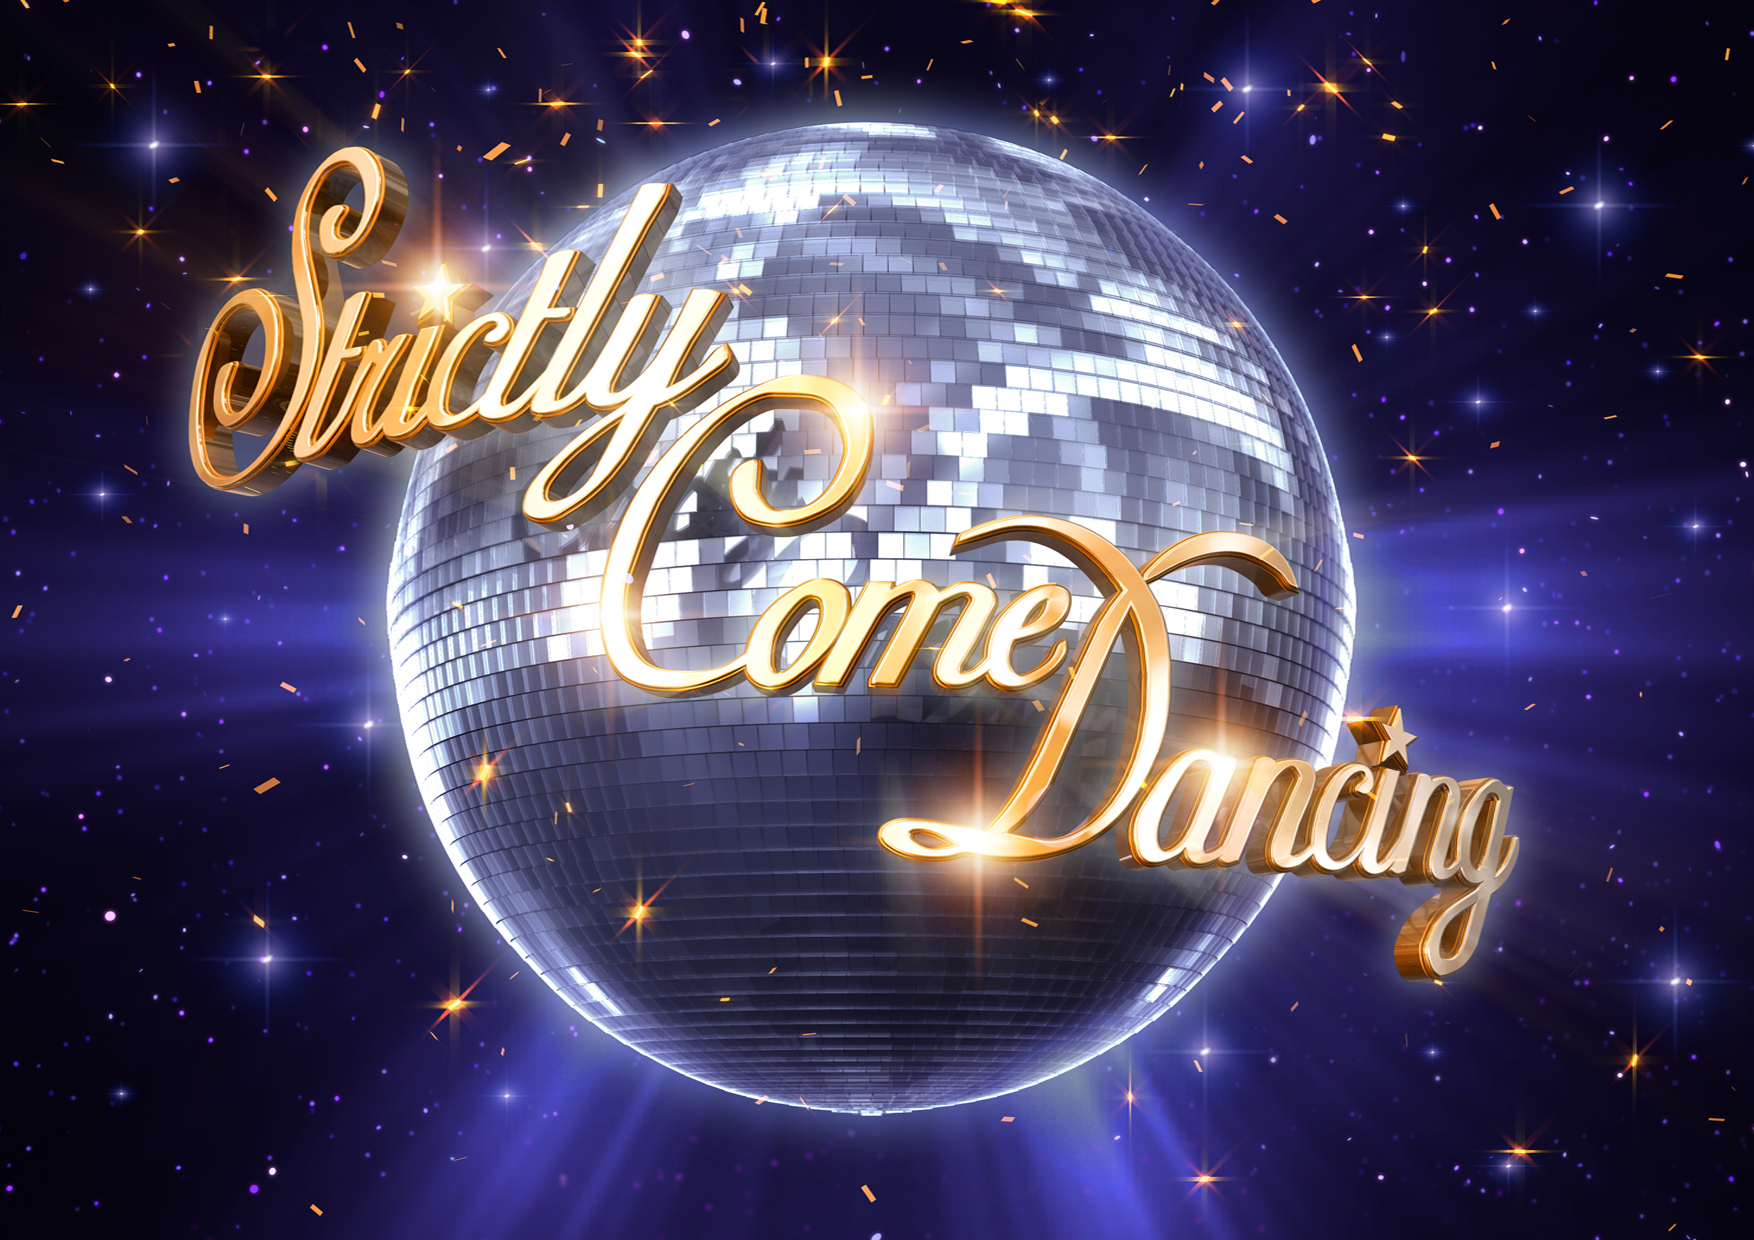 Strictly Come Dancing's New logo 2011